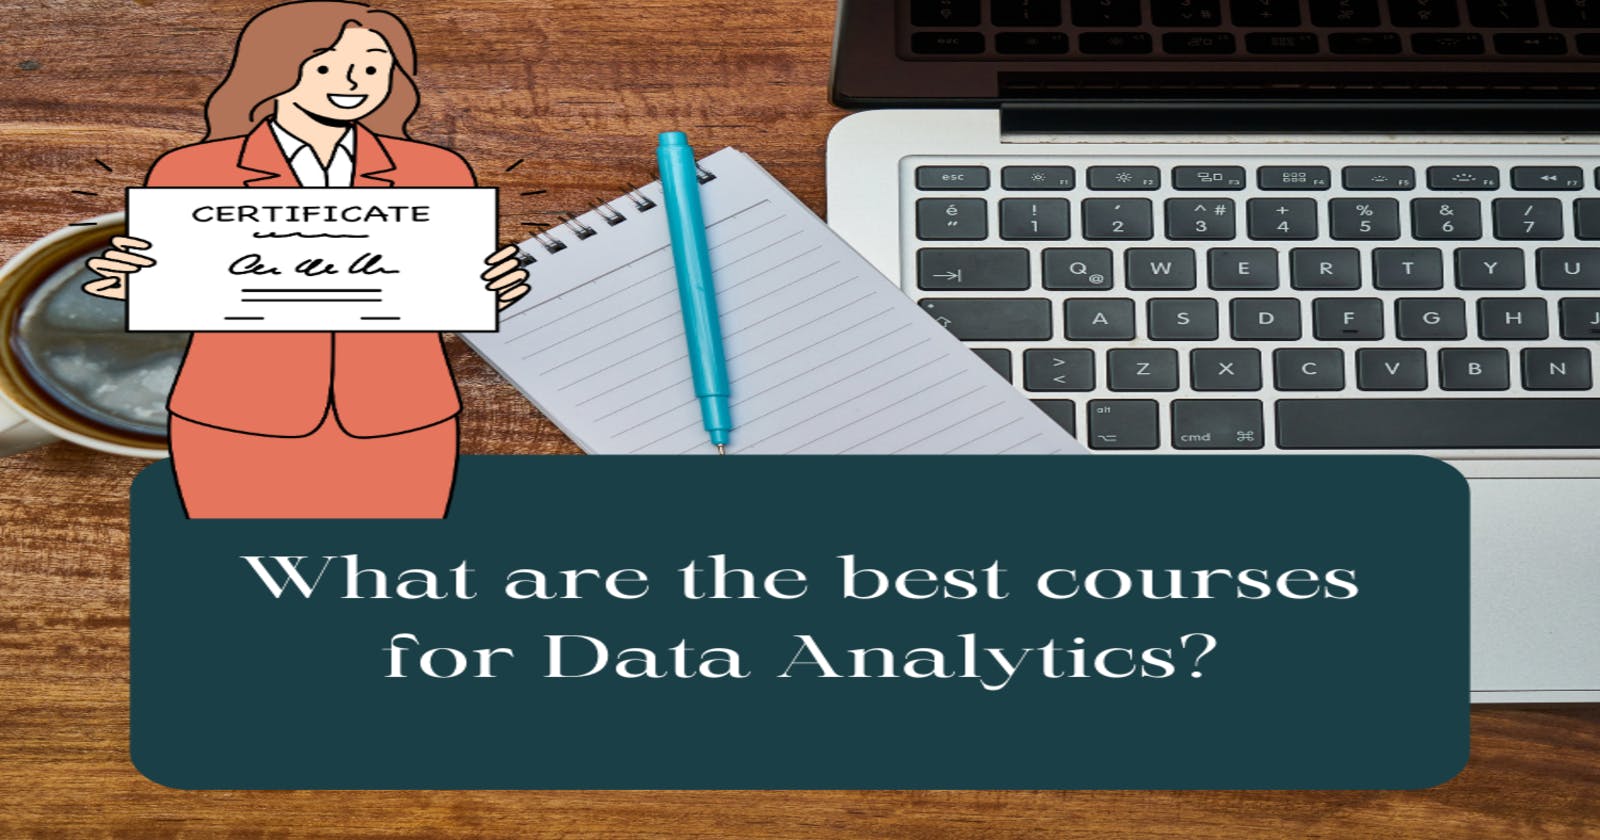 What are the best courses for Data Analytics?